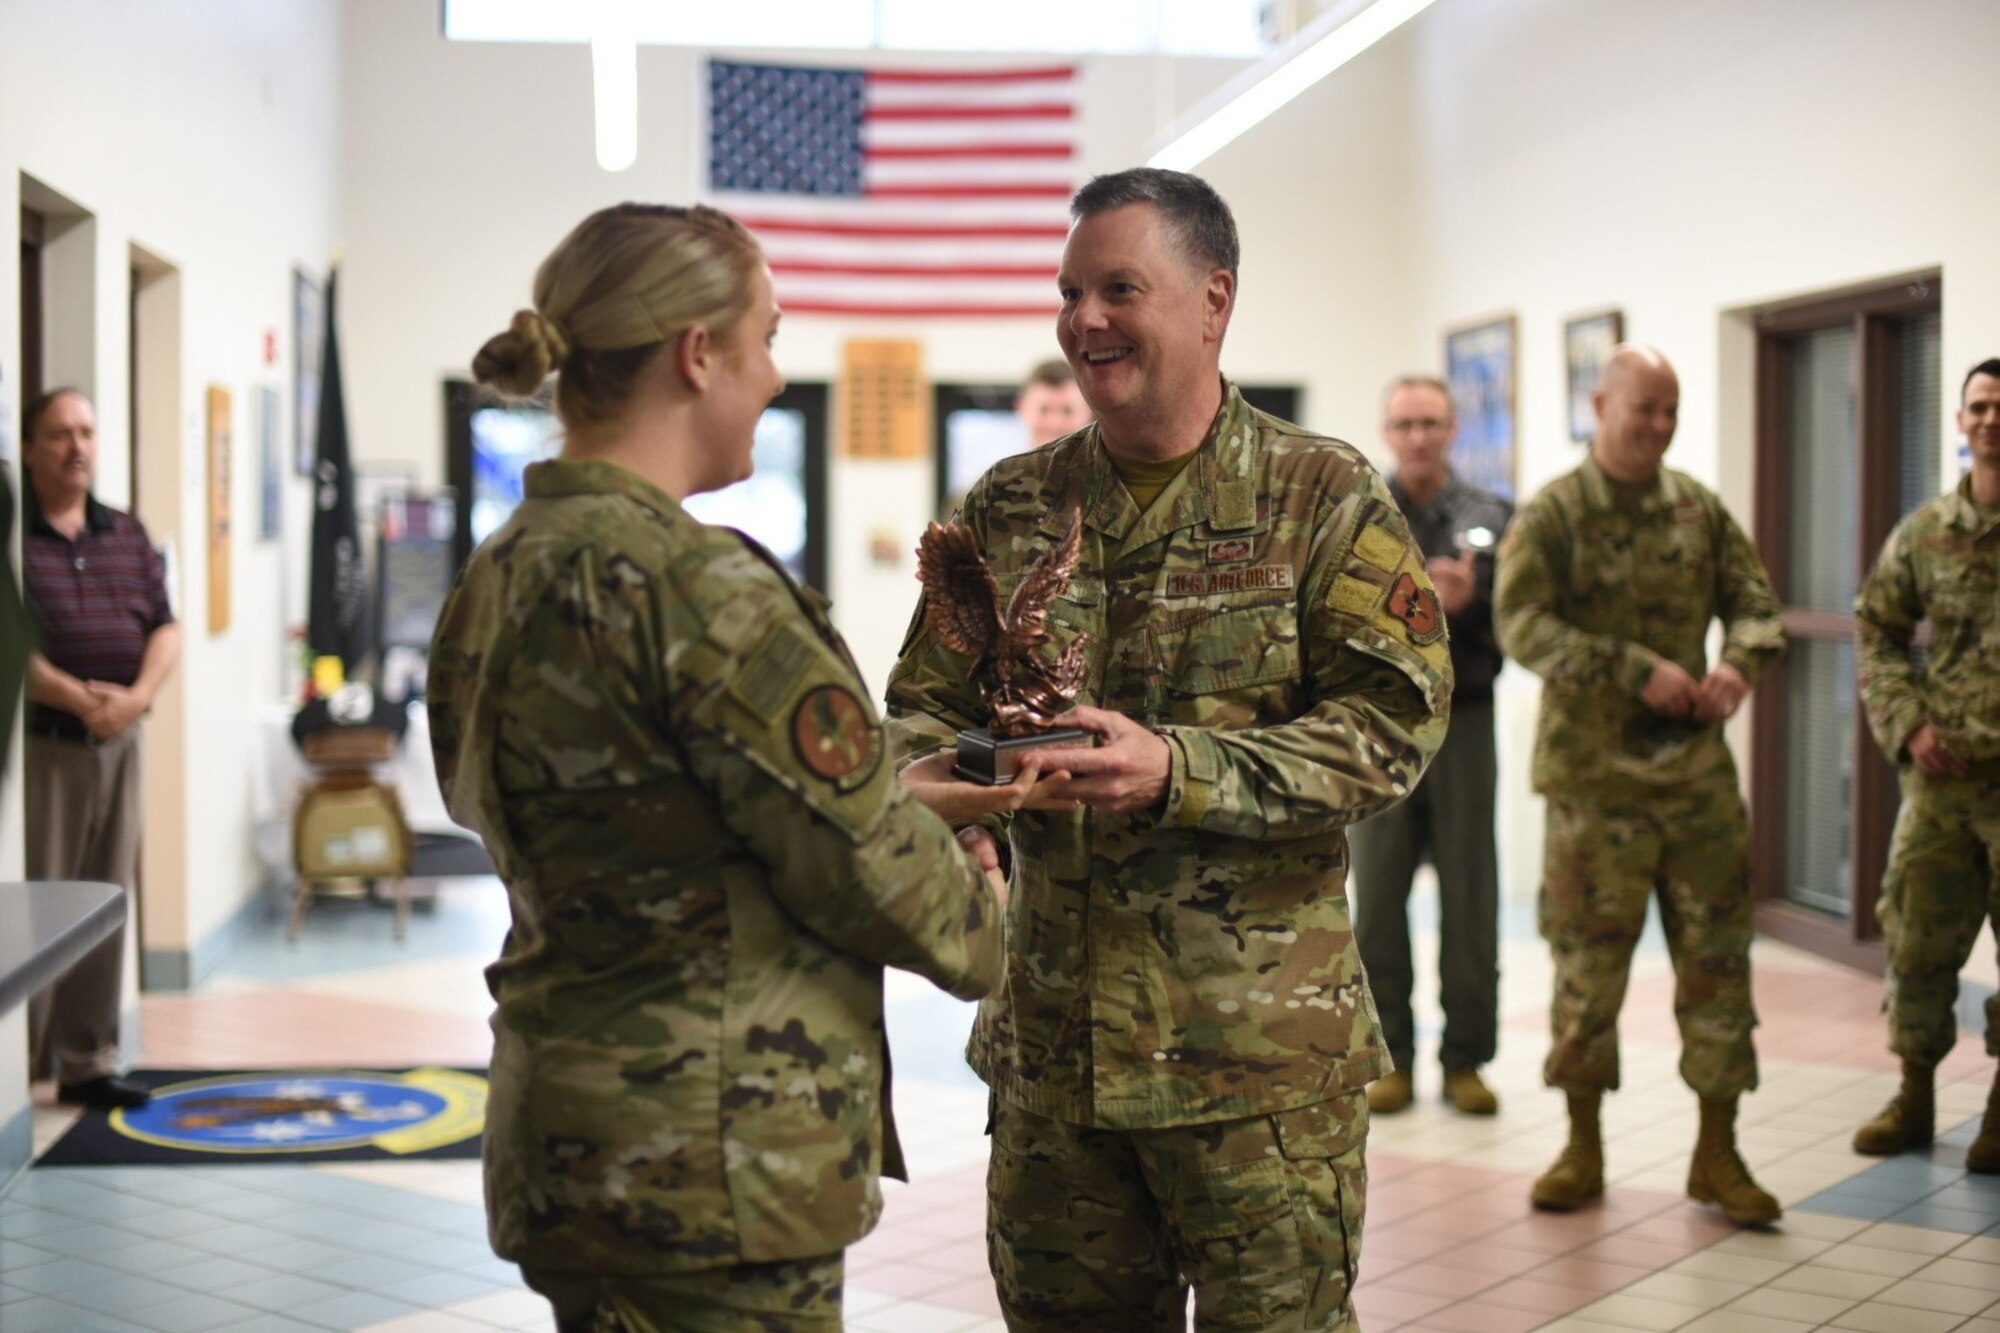 U.S. Air Force Lt. Gen. Brad Webb, commander of Air Education and Training Command, and Chief Master Sgt. Juliet Gudgel, command chief of AETC, present coins to outstanding performers of the 14th Flying Training Wing during their visit Feb. 5, 2020, on Columbus AFB, Mississippi. The app was designed for members of team BLAZE to have pertinent information about the base including a directory, map, activities and pop up notifications. (U.S. Air Force photo by Senior Airman Keith Holcomb)